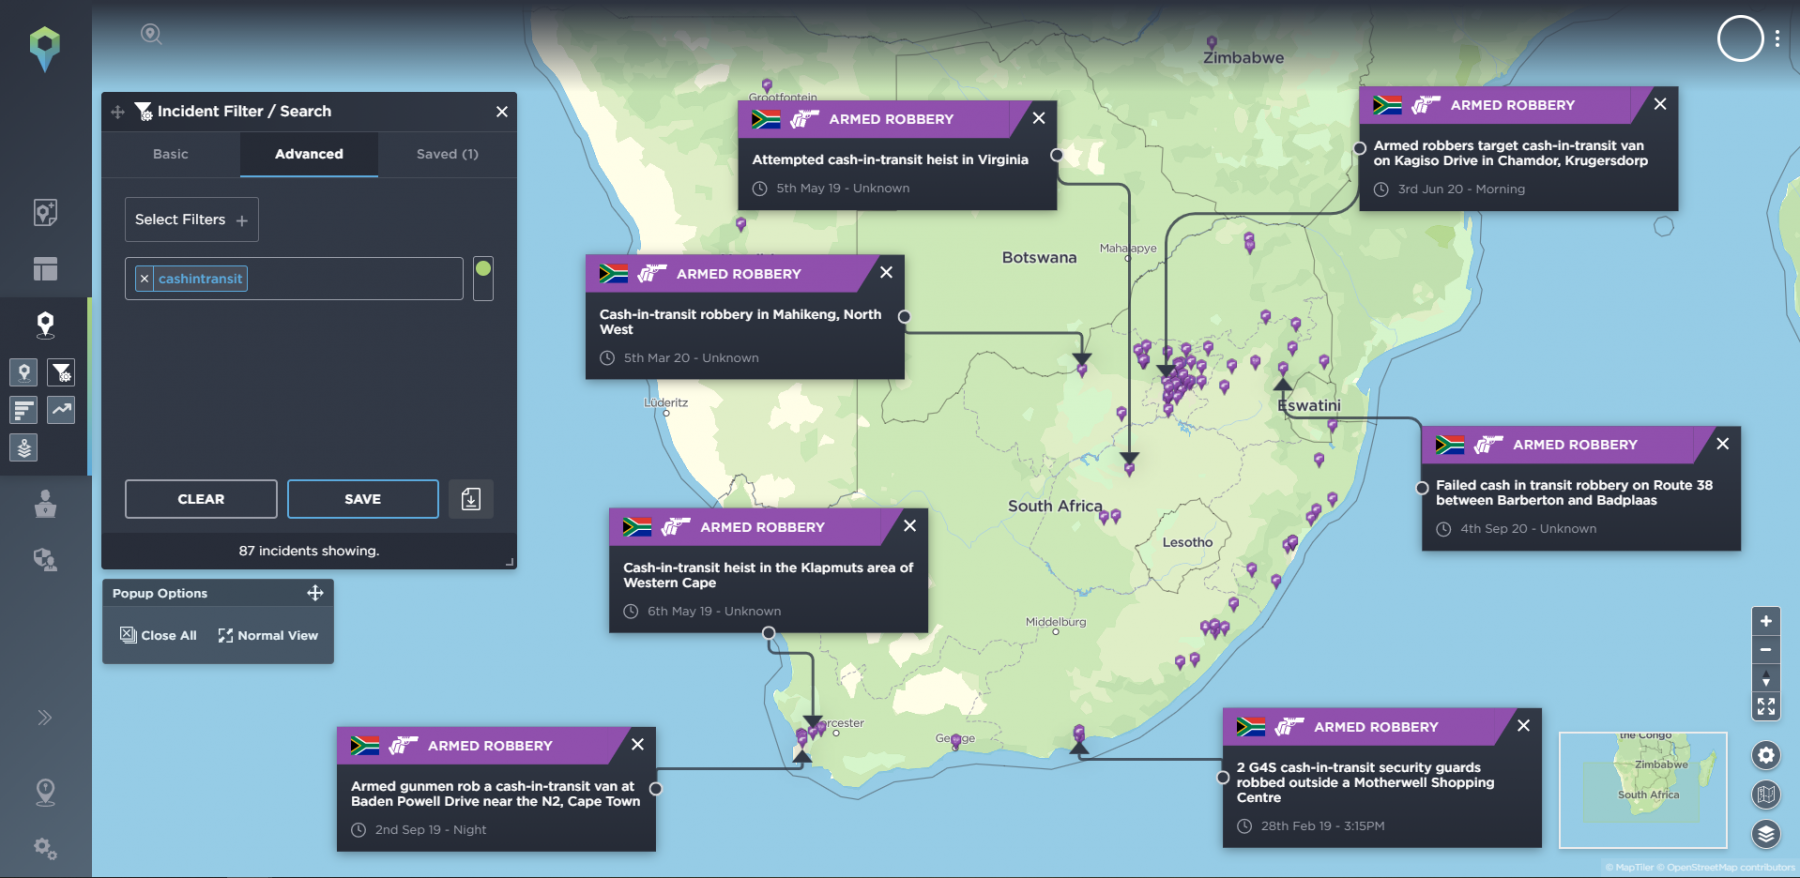 Cash in Transit robberies across South Africa